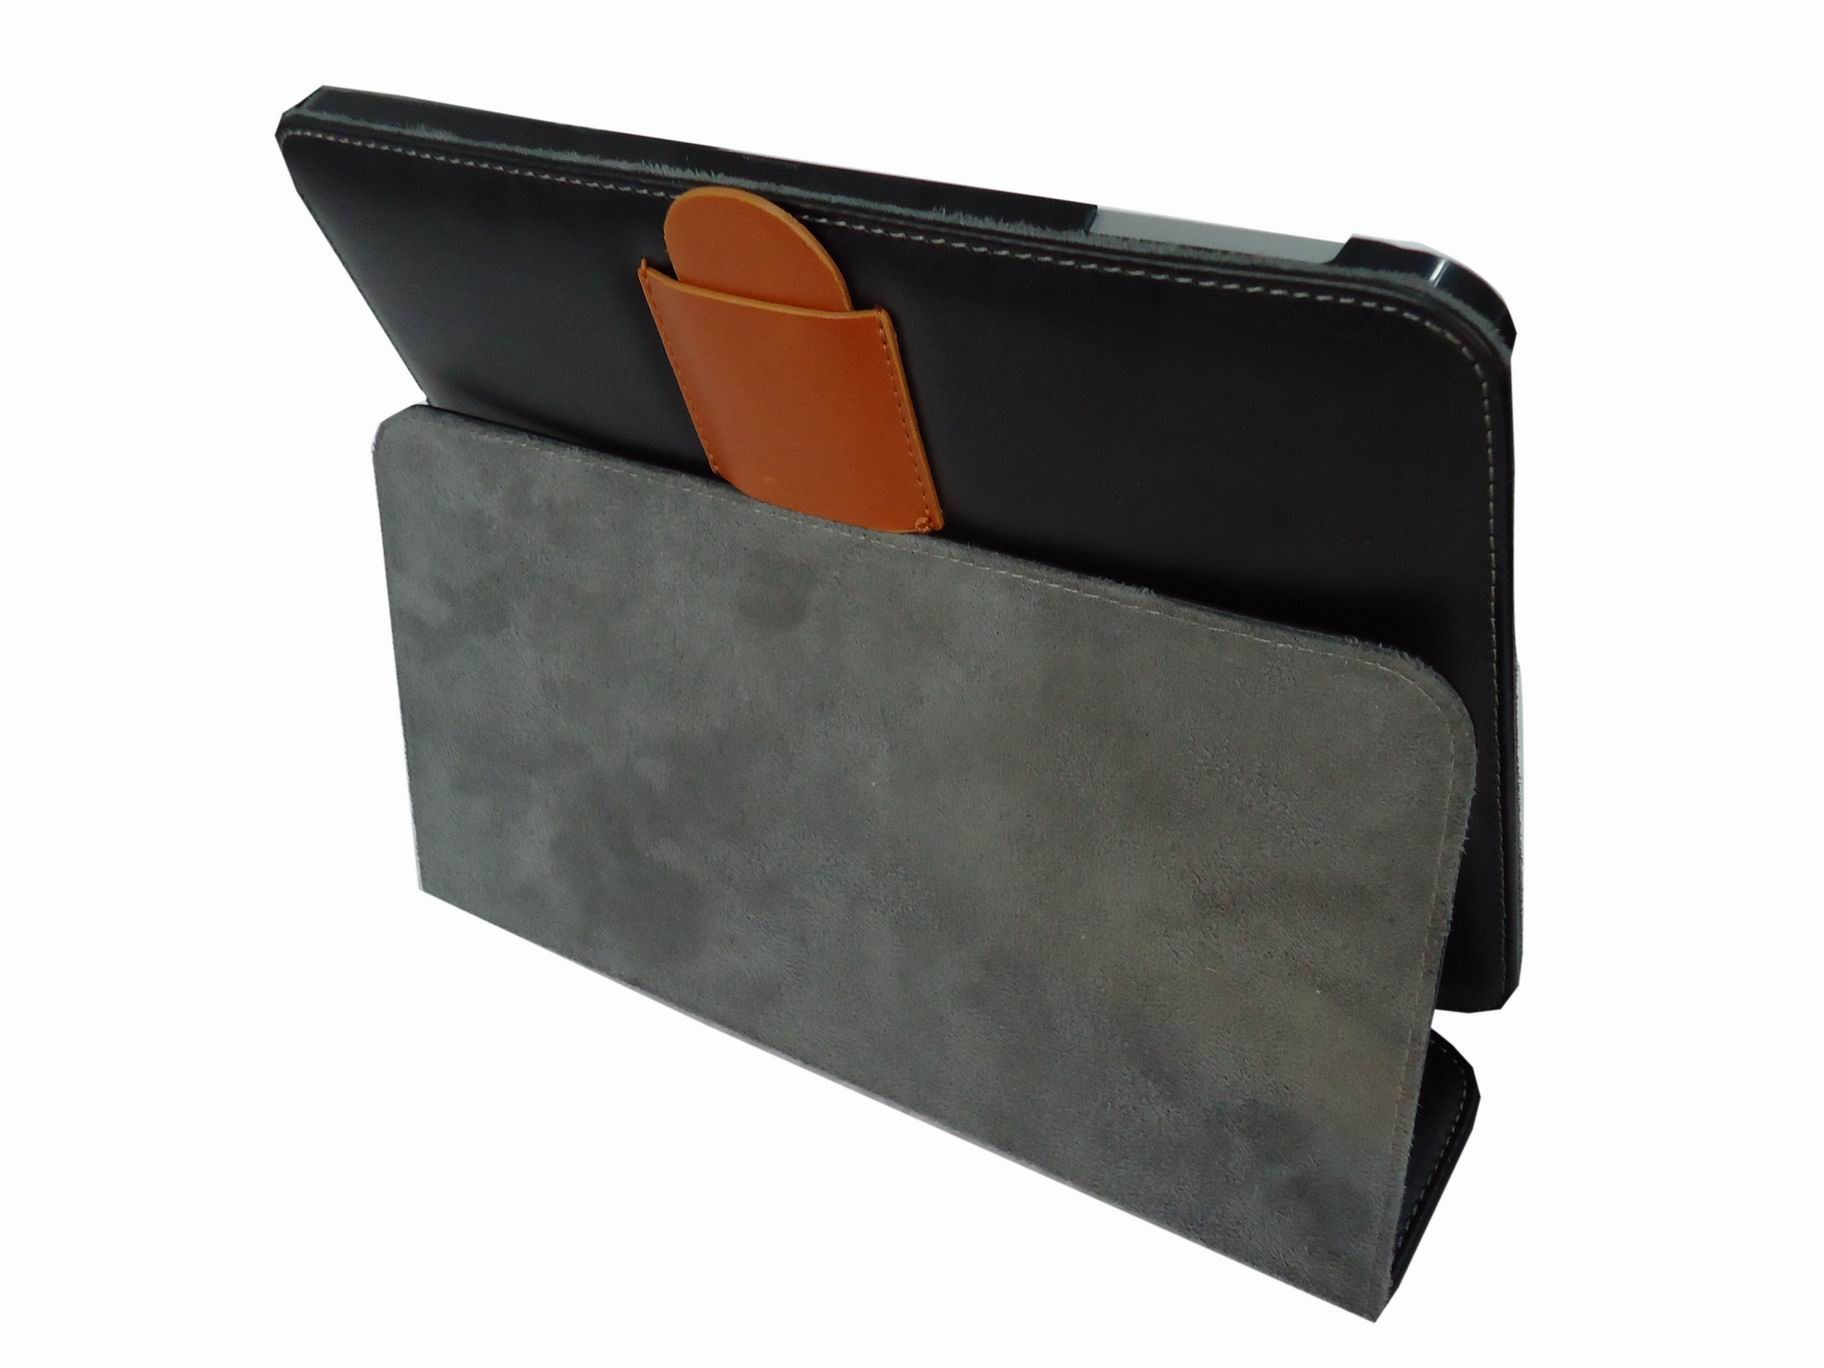 the hotest Ipad leather cases in 2011